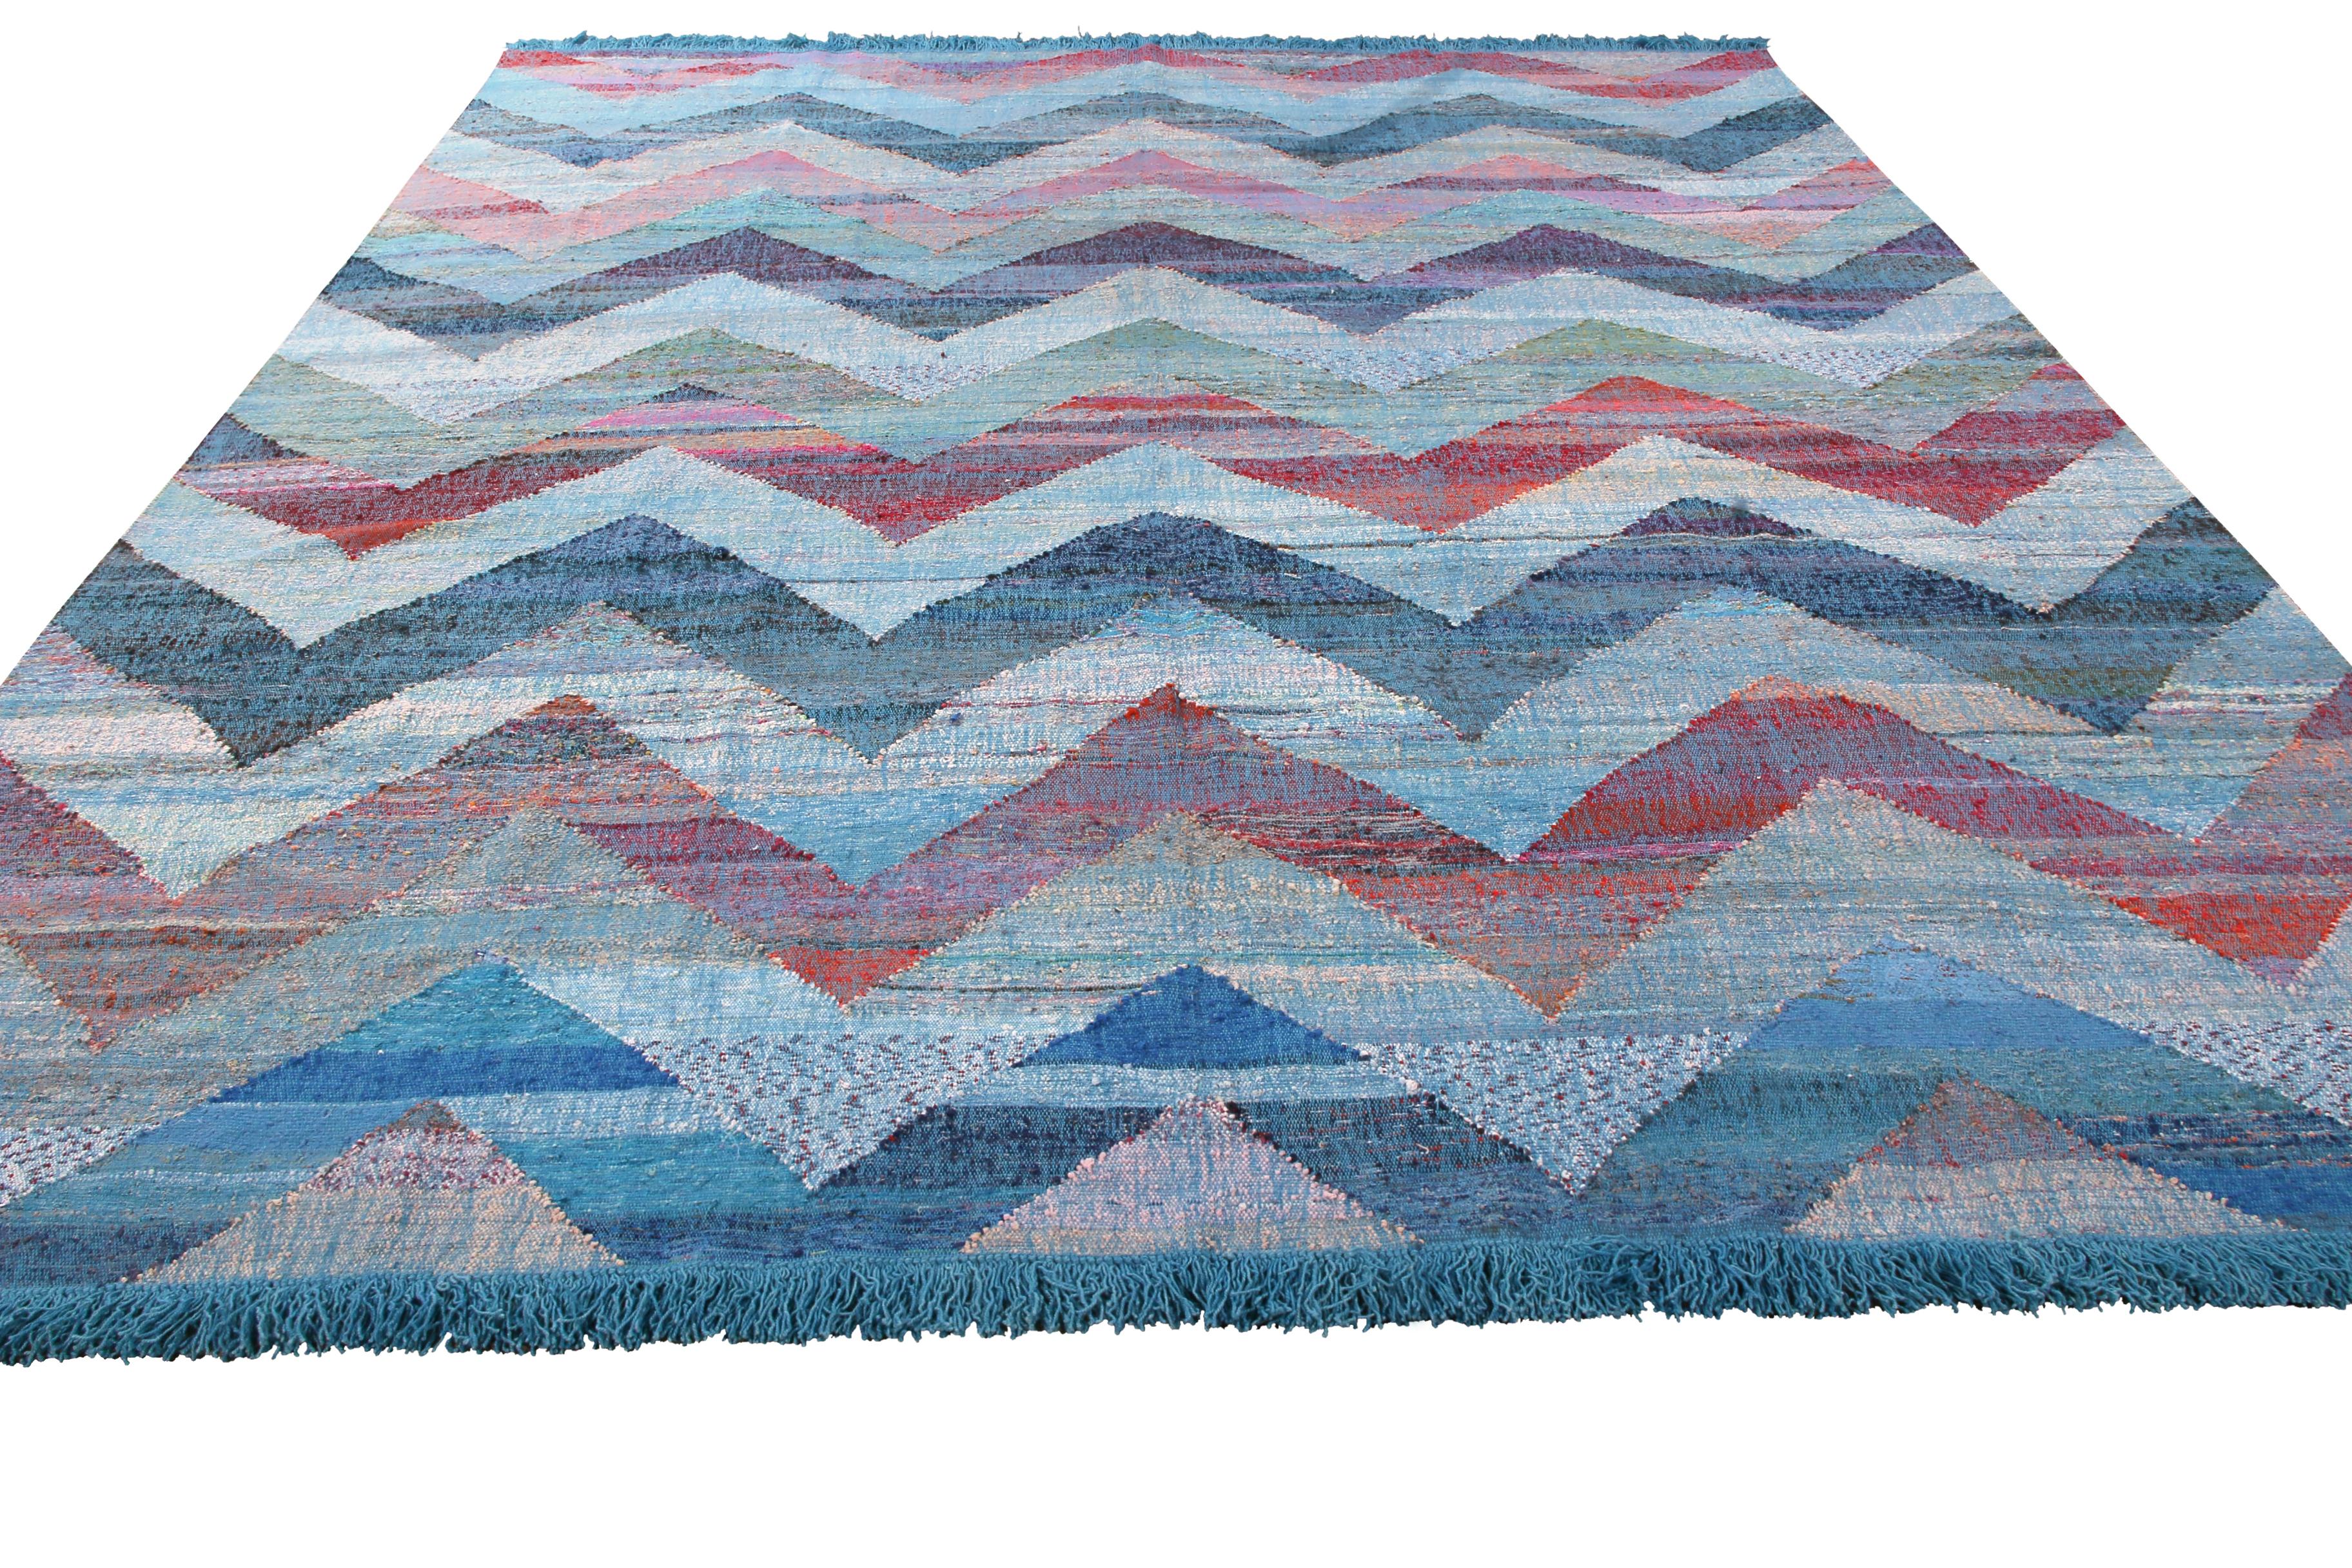 This modern Kilim represents a selection of distinct new patterns joining Rug & Kilim’s New and Modern collection, uniquely handwoven from the yarns of Classic textiles and Kilims to create this transitional flat-weave and its lively, varied